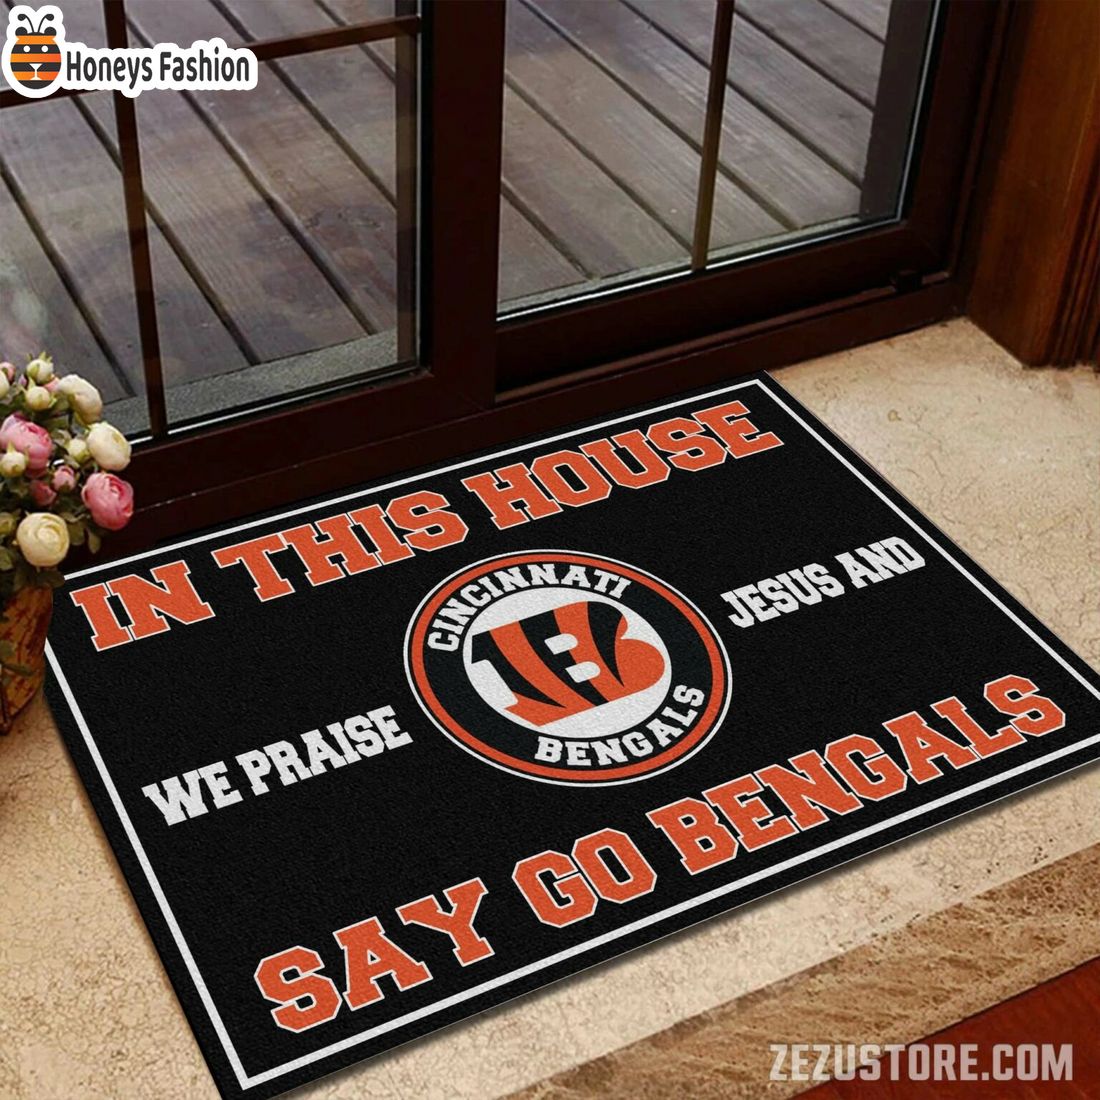 In this house we praise jesus and say go Bengals doormat